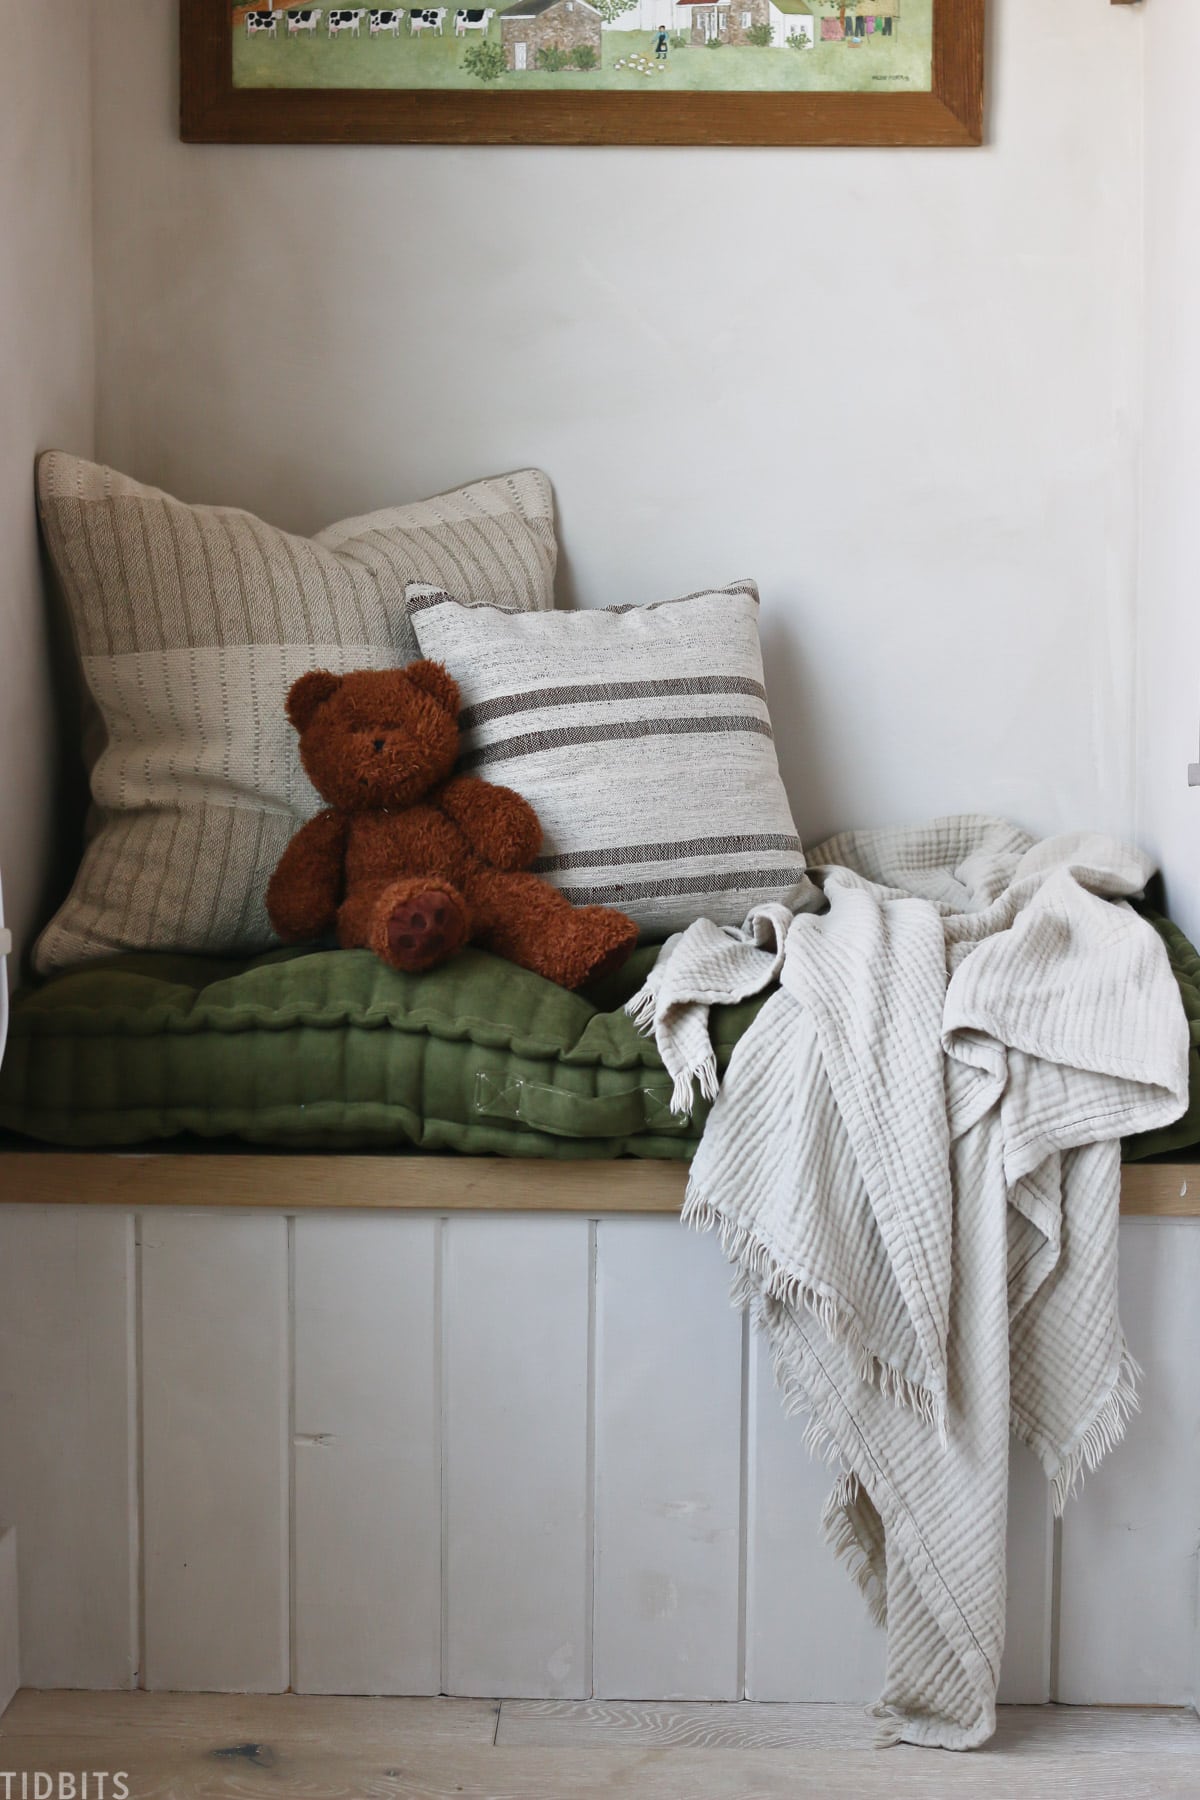 teddy bear, throw pillows, a throw blanket, and a cushion on top of a built in bench